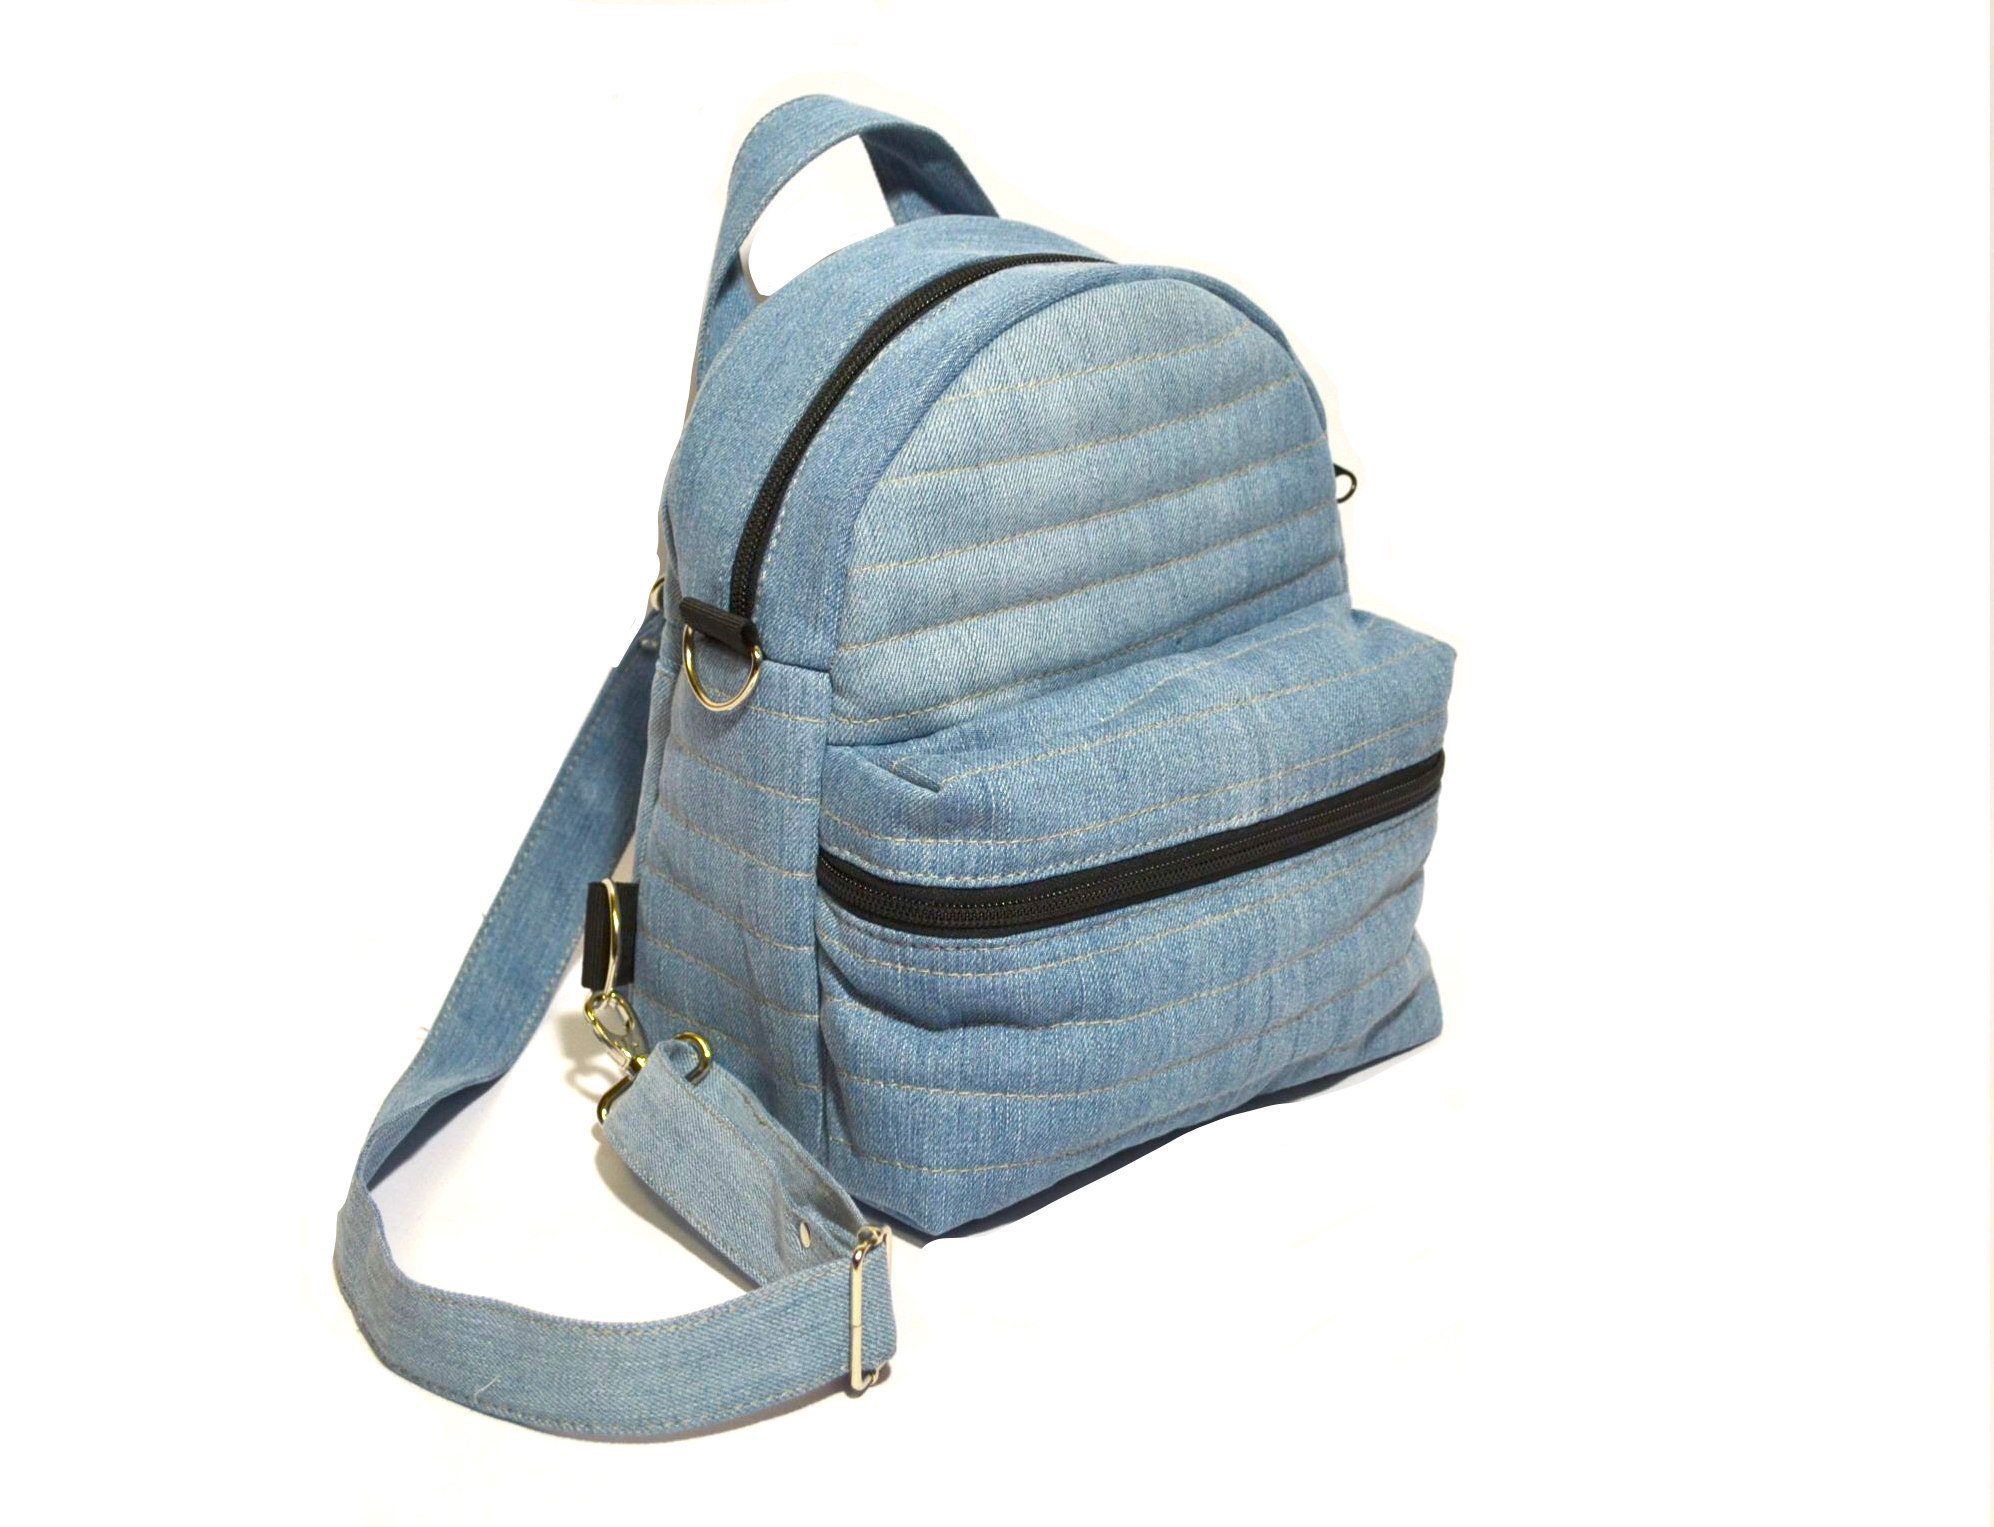 Upcycled denim backpack - Upcycle That